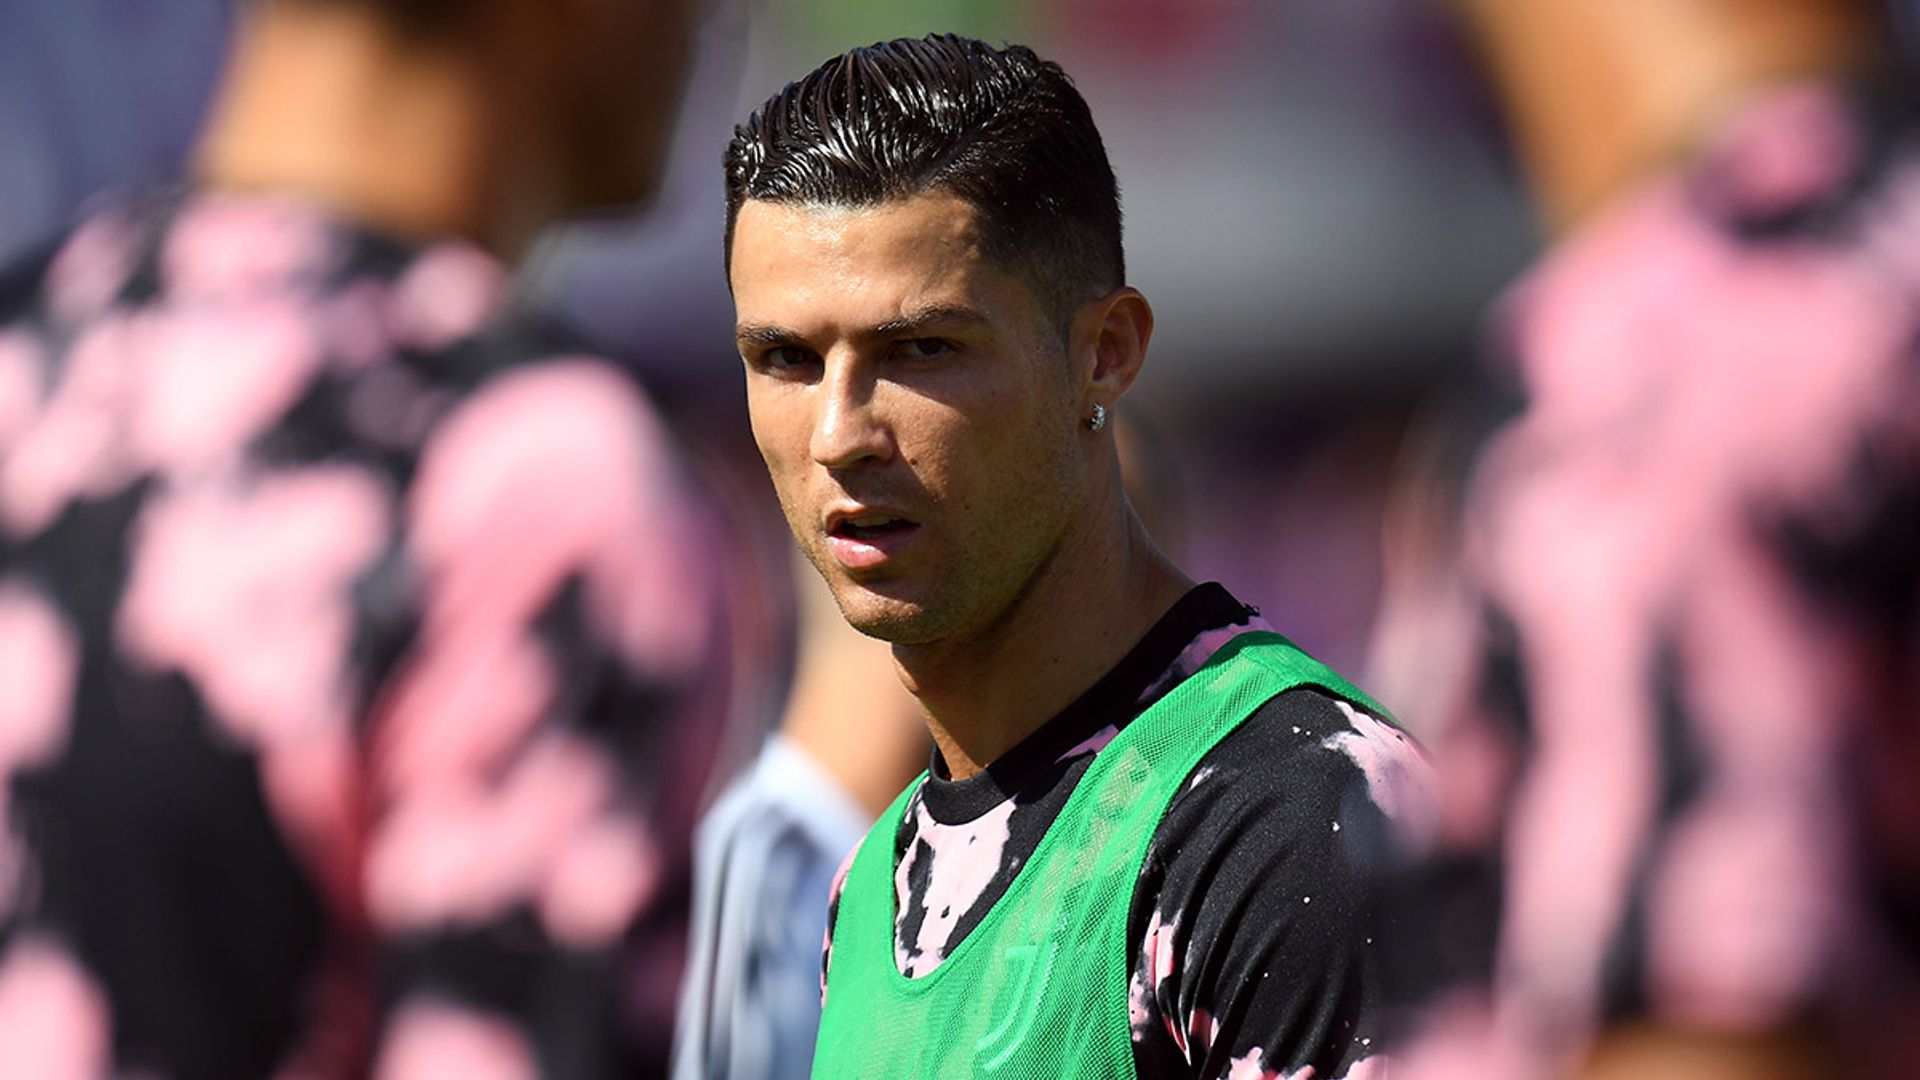 935 Ronaldo Stock Videos, Footage, & 4K Video Clips - Getty Images